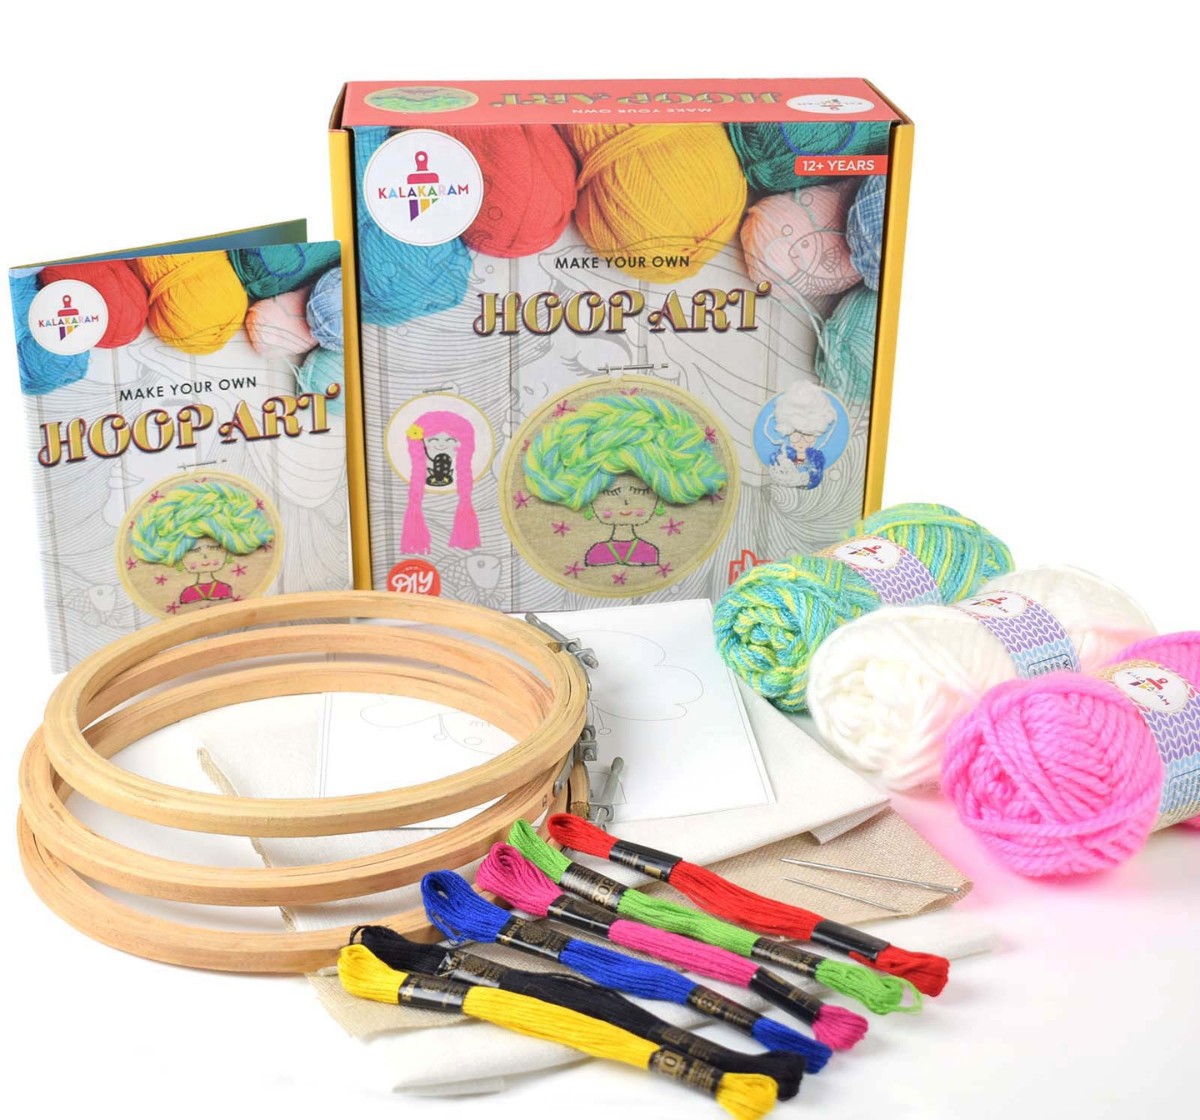 Kalakaram Hoop Art Embroidery Kit, DIY Art and Craft Embroidery Activity Kit for Girls, Beginners Kit Easy to Make, 10Y+, Multicolour